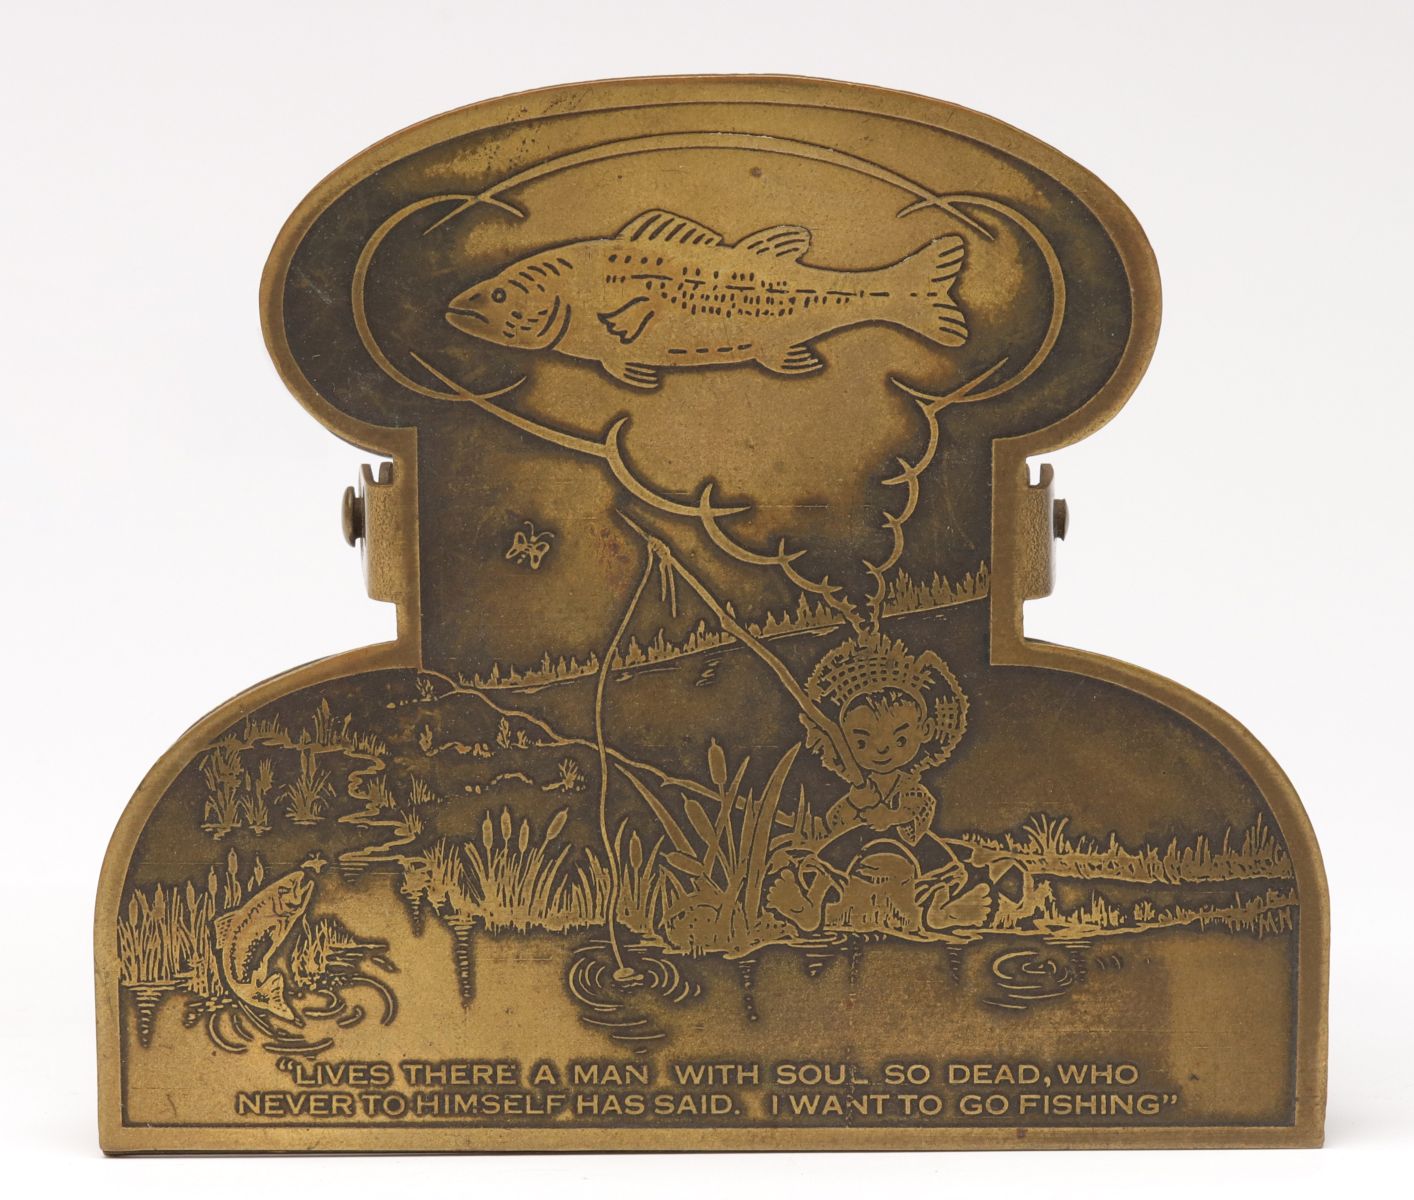 A FISHING THEME PICTORIAL BRASS BILL CLIP C. 1920